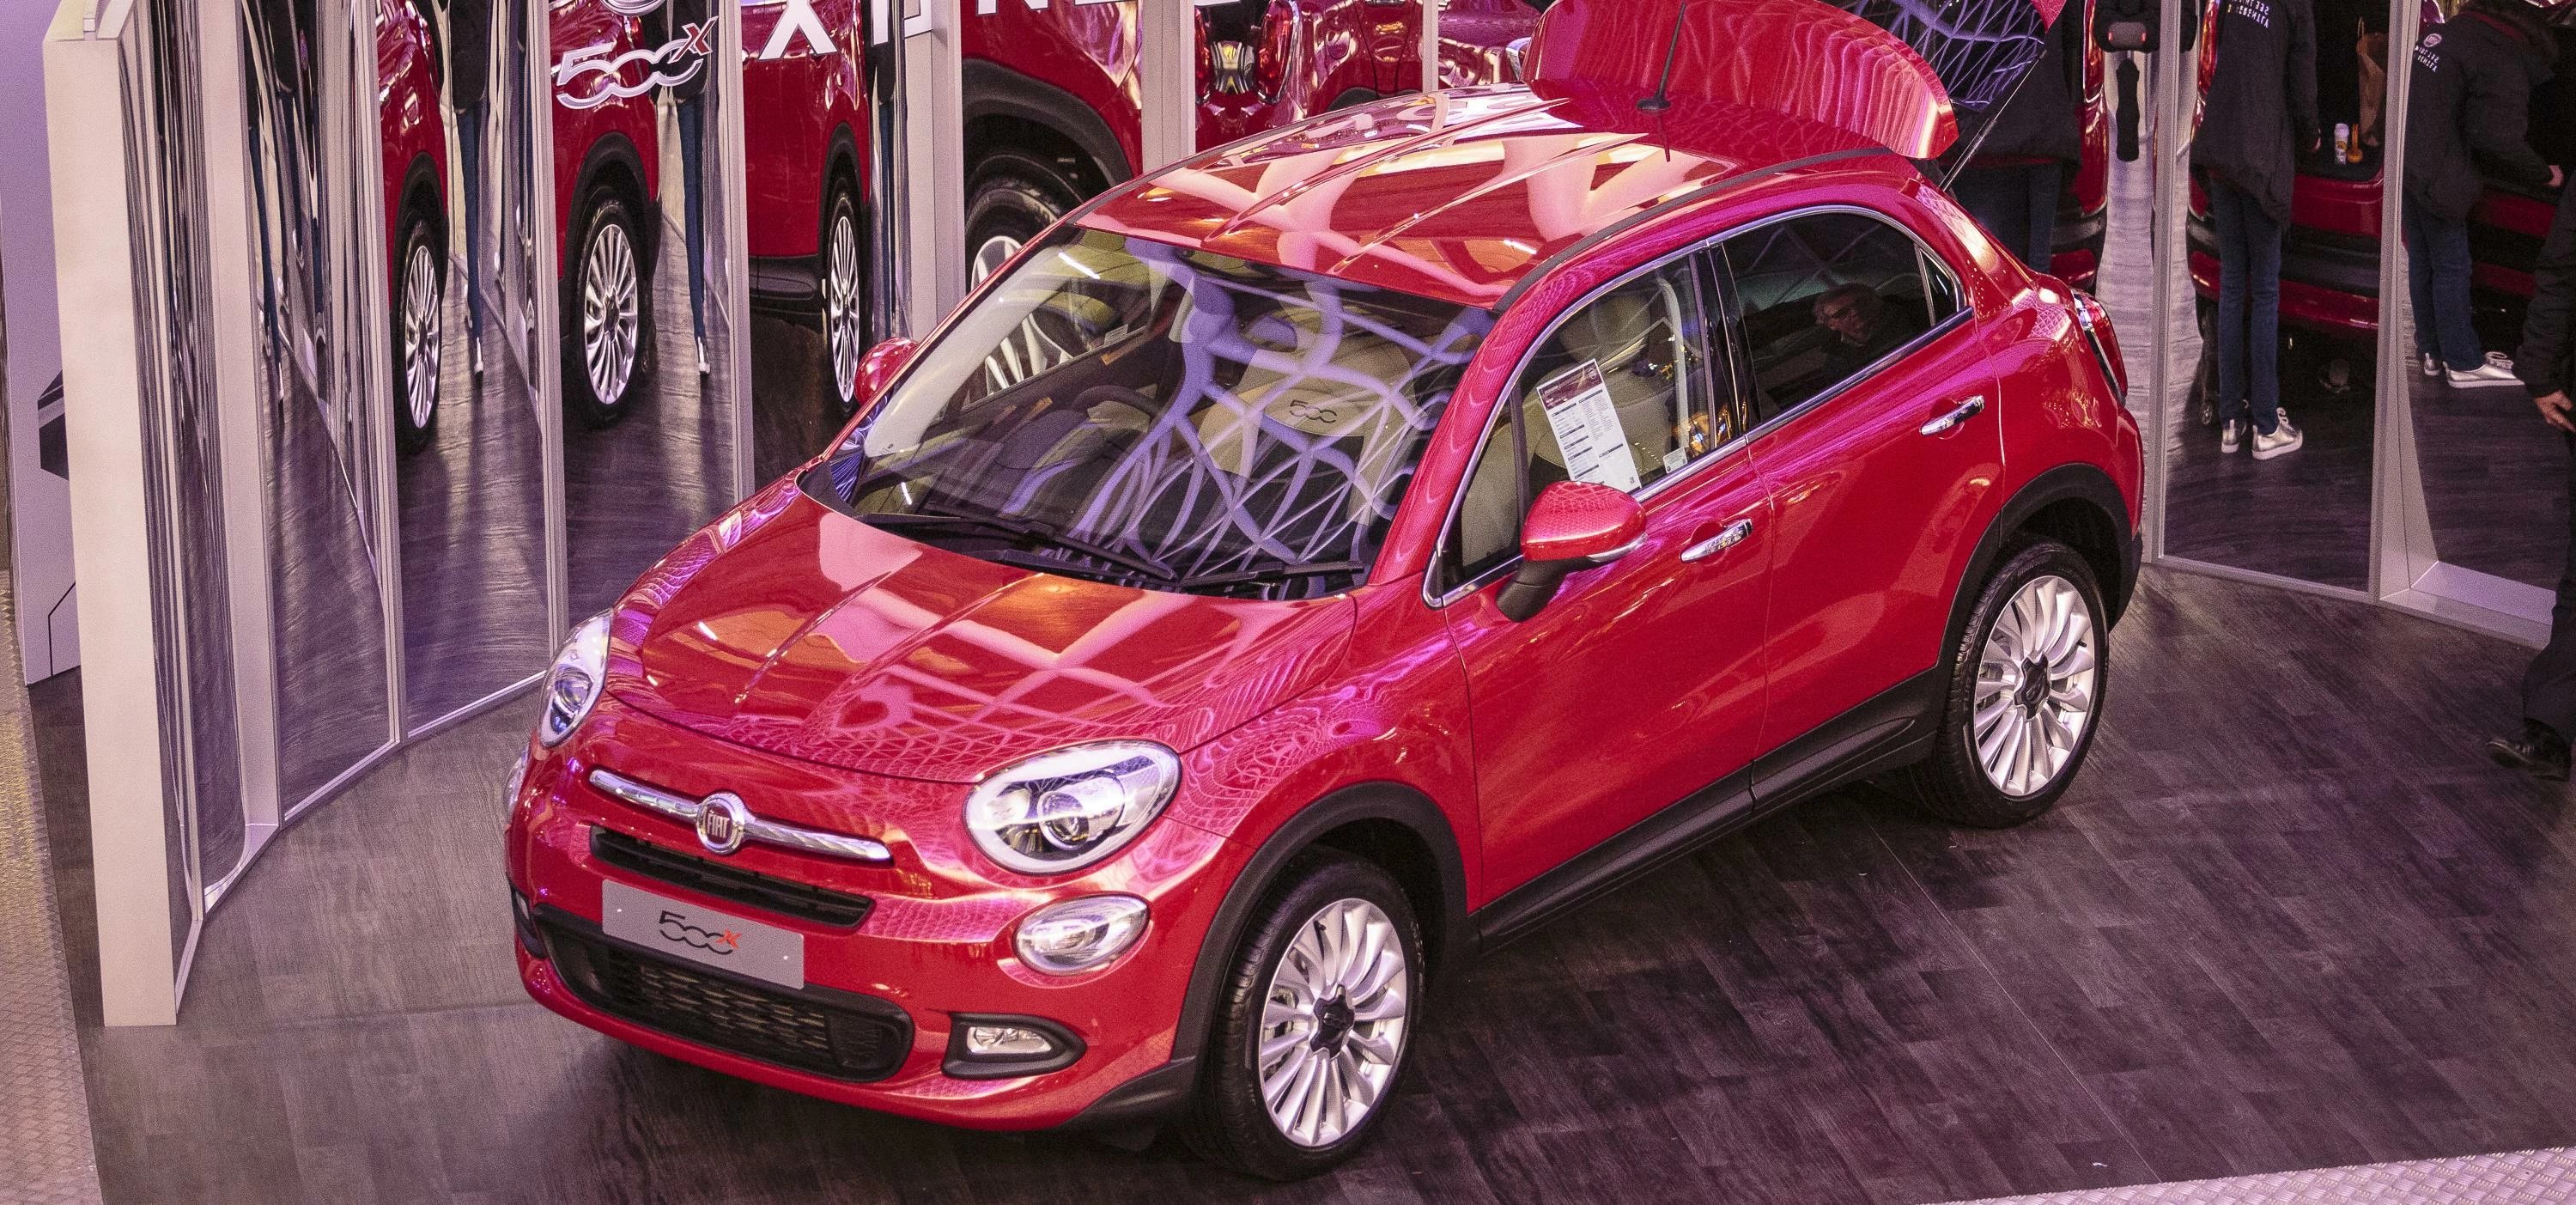 Fiat challenges consumers to see new Fiat 500X and Fiat Tipo models ‘differently’ in new experientia